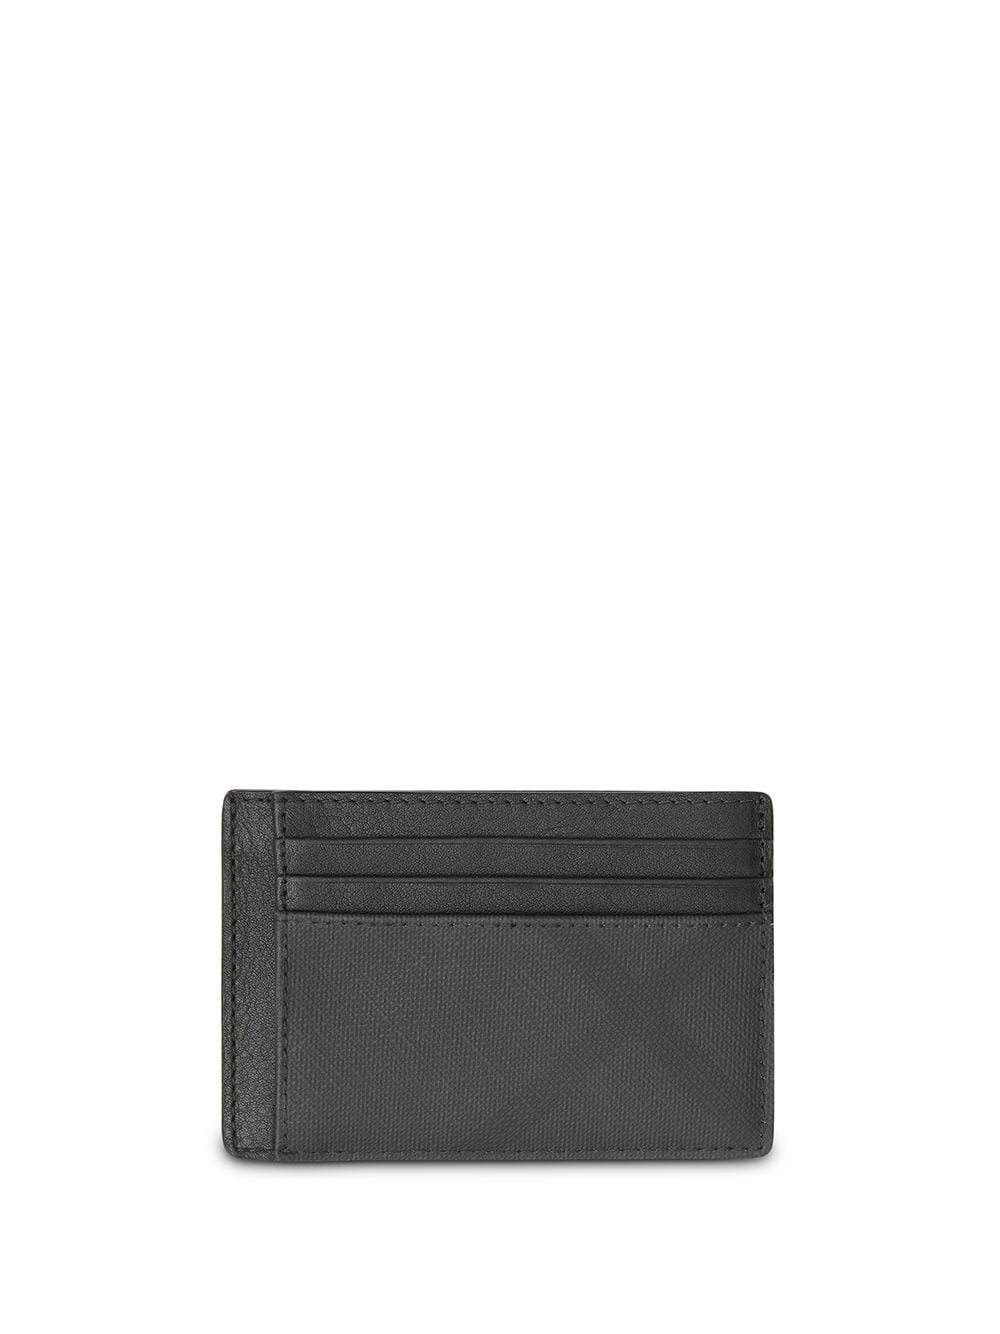 burberry CHASE WALLET available on montiboutique.com - 29403